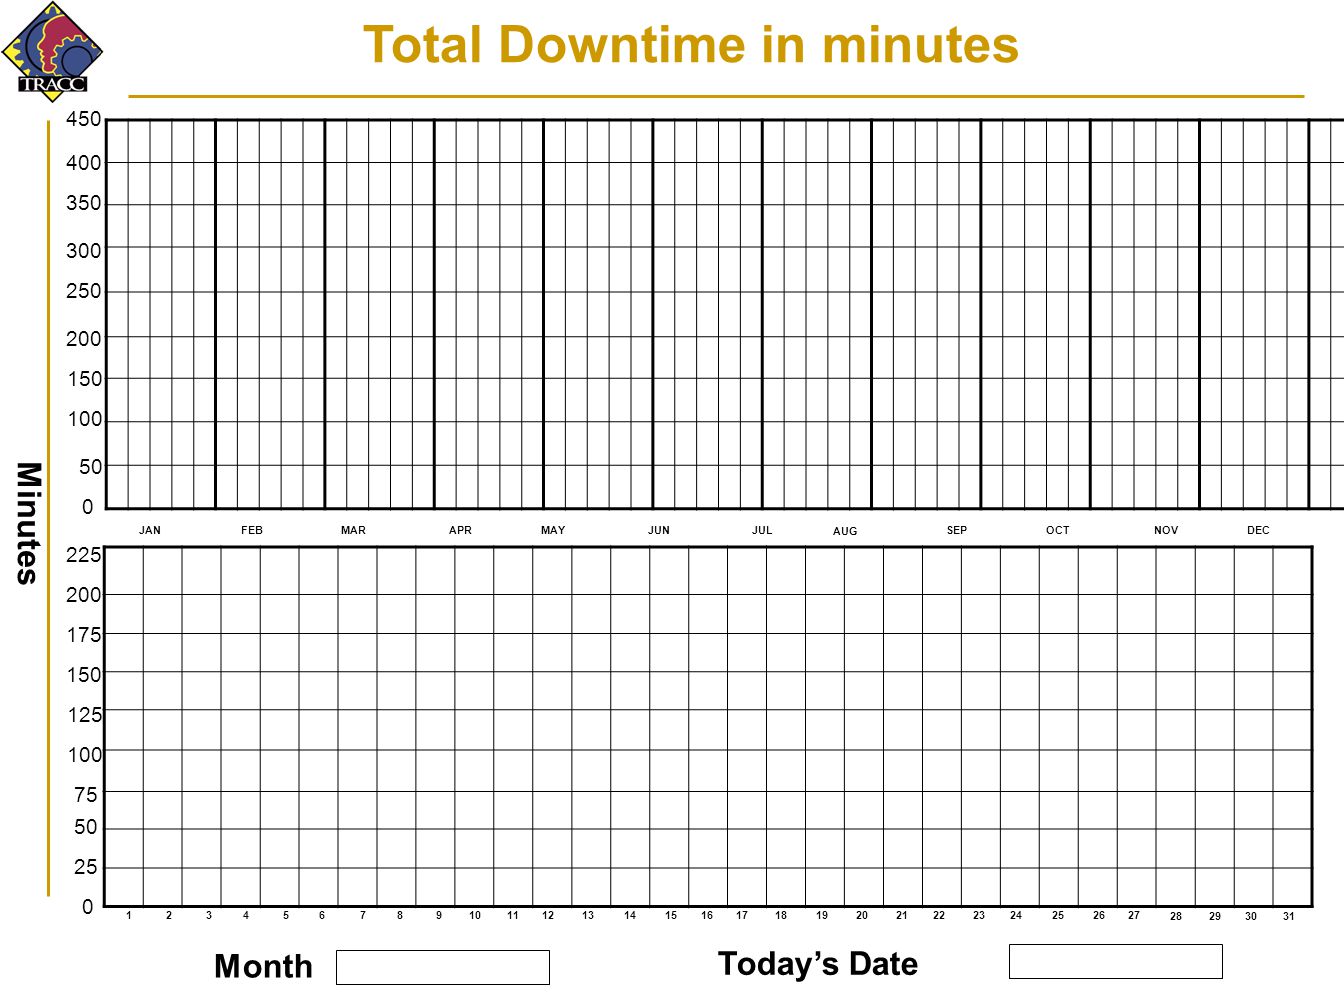 Total Downtime in minutes